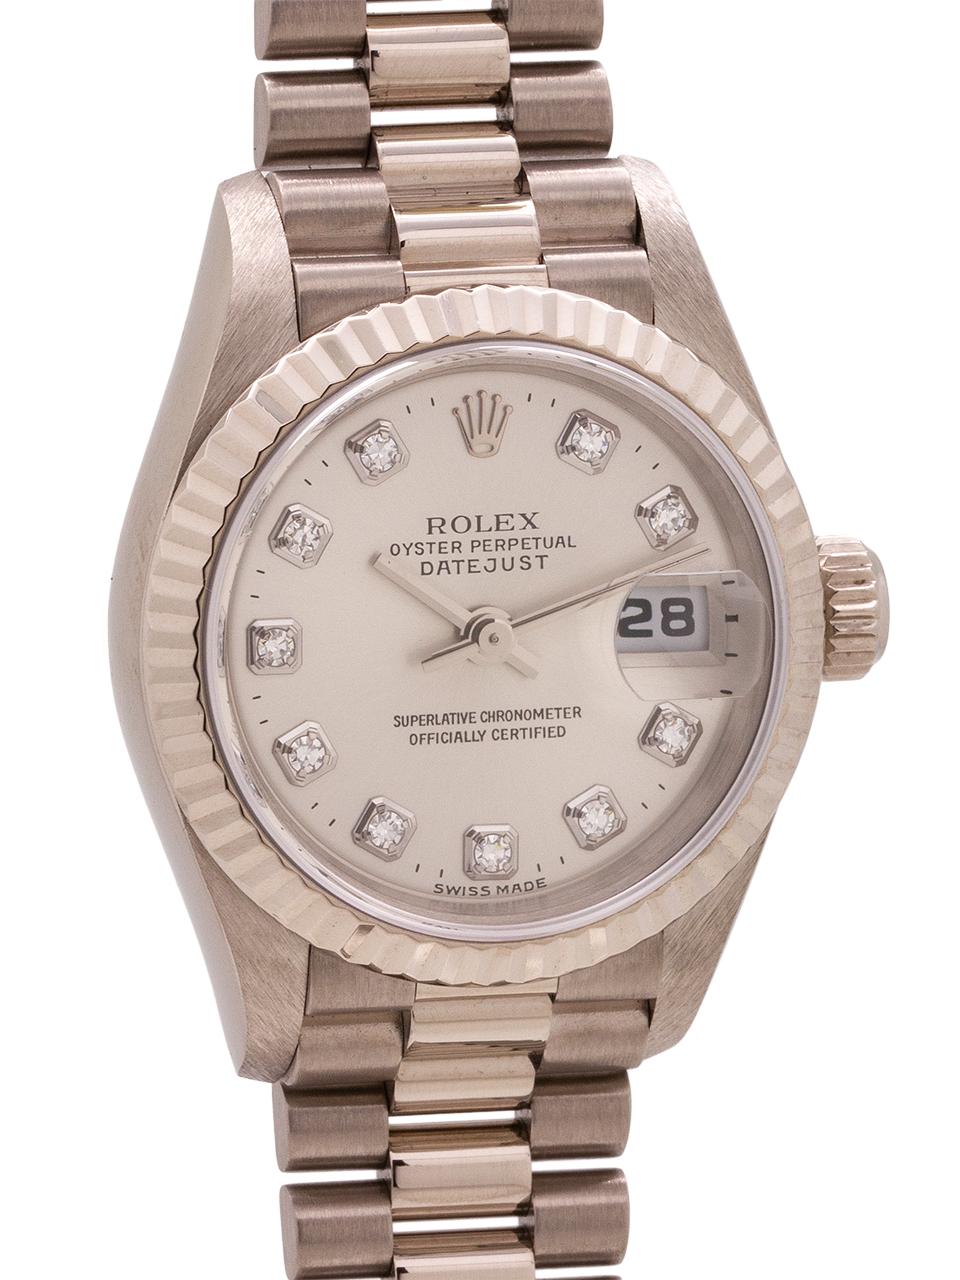 
A beautiful Lady President Rolex in 18K white gold, ref 79174 serial #A circa 1999. Featuring a mint condition 26mm diameter case with fluted bezel, and sapphire crystal. The condition of this piece can’t possibly be overstated. It’s hard to